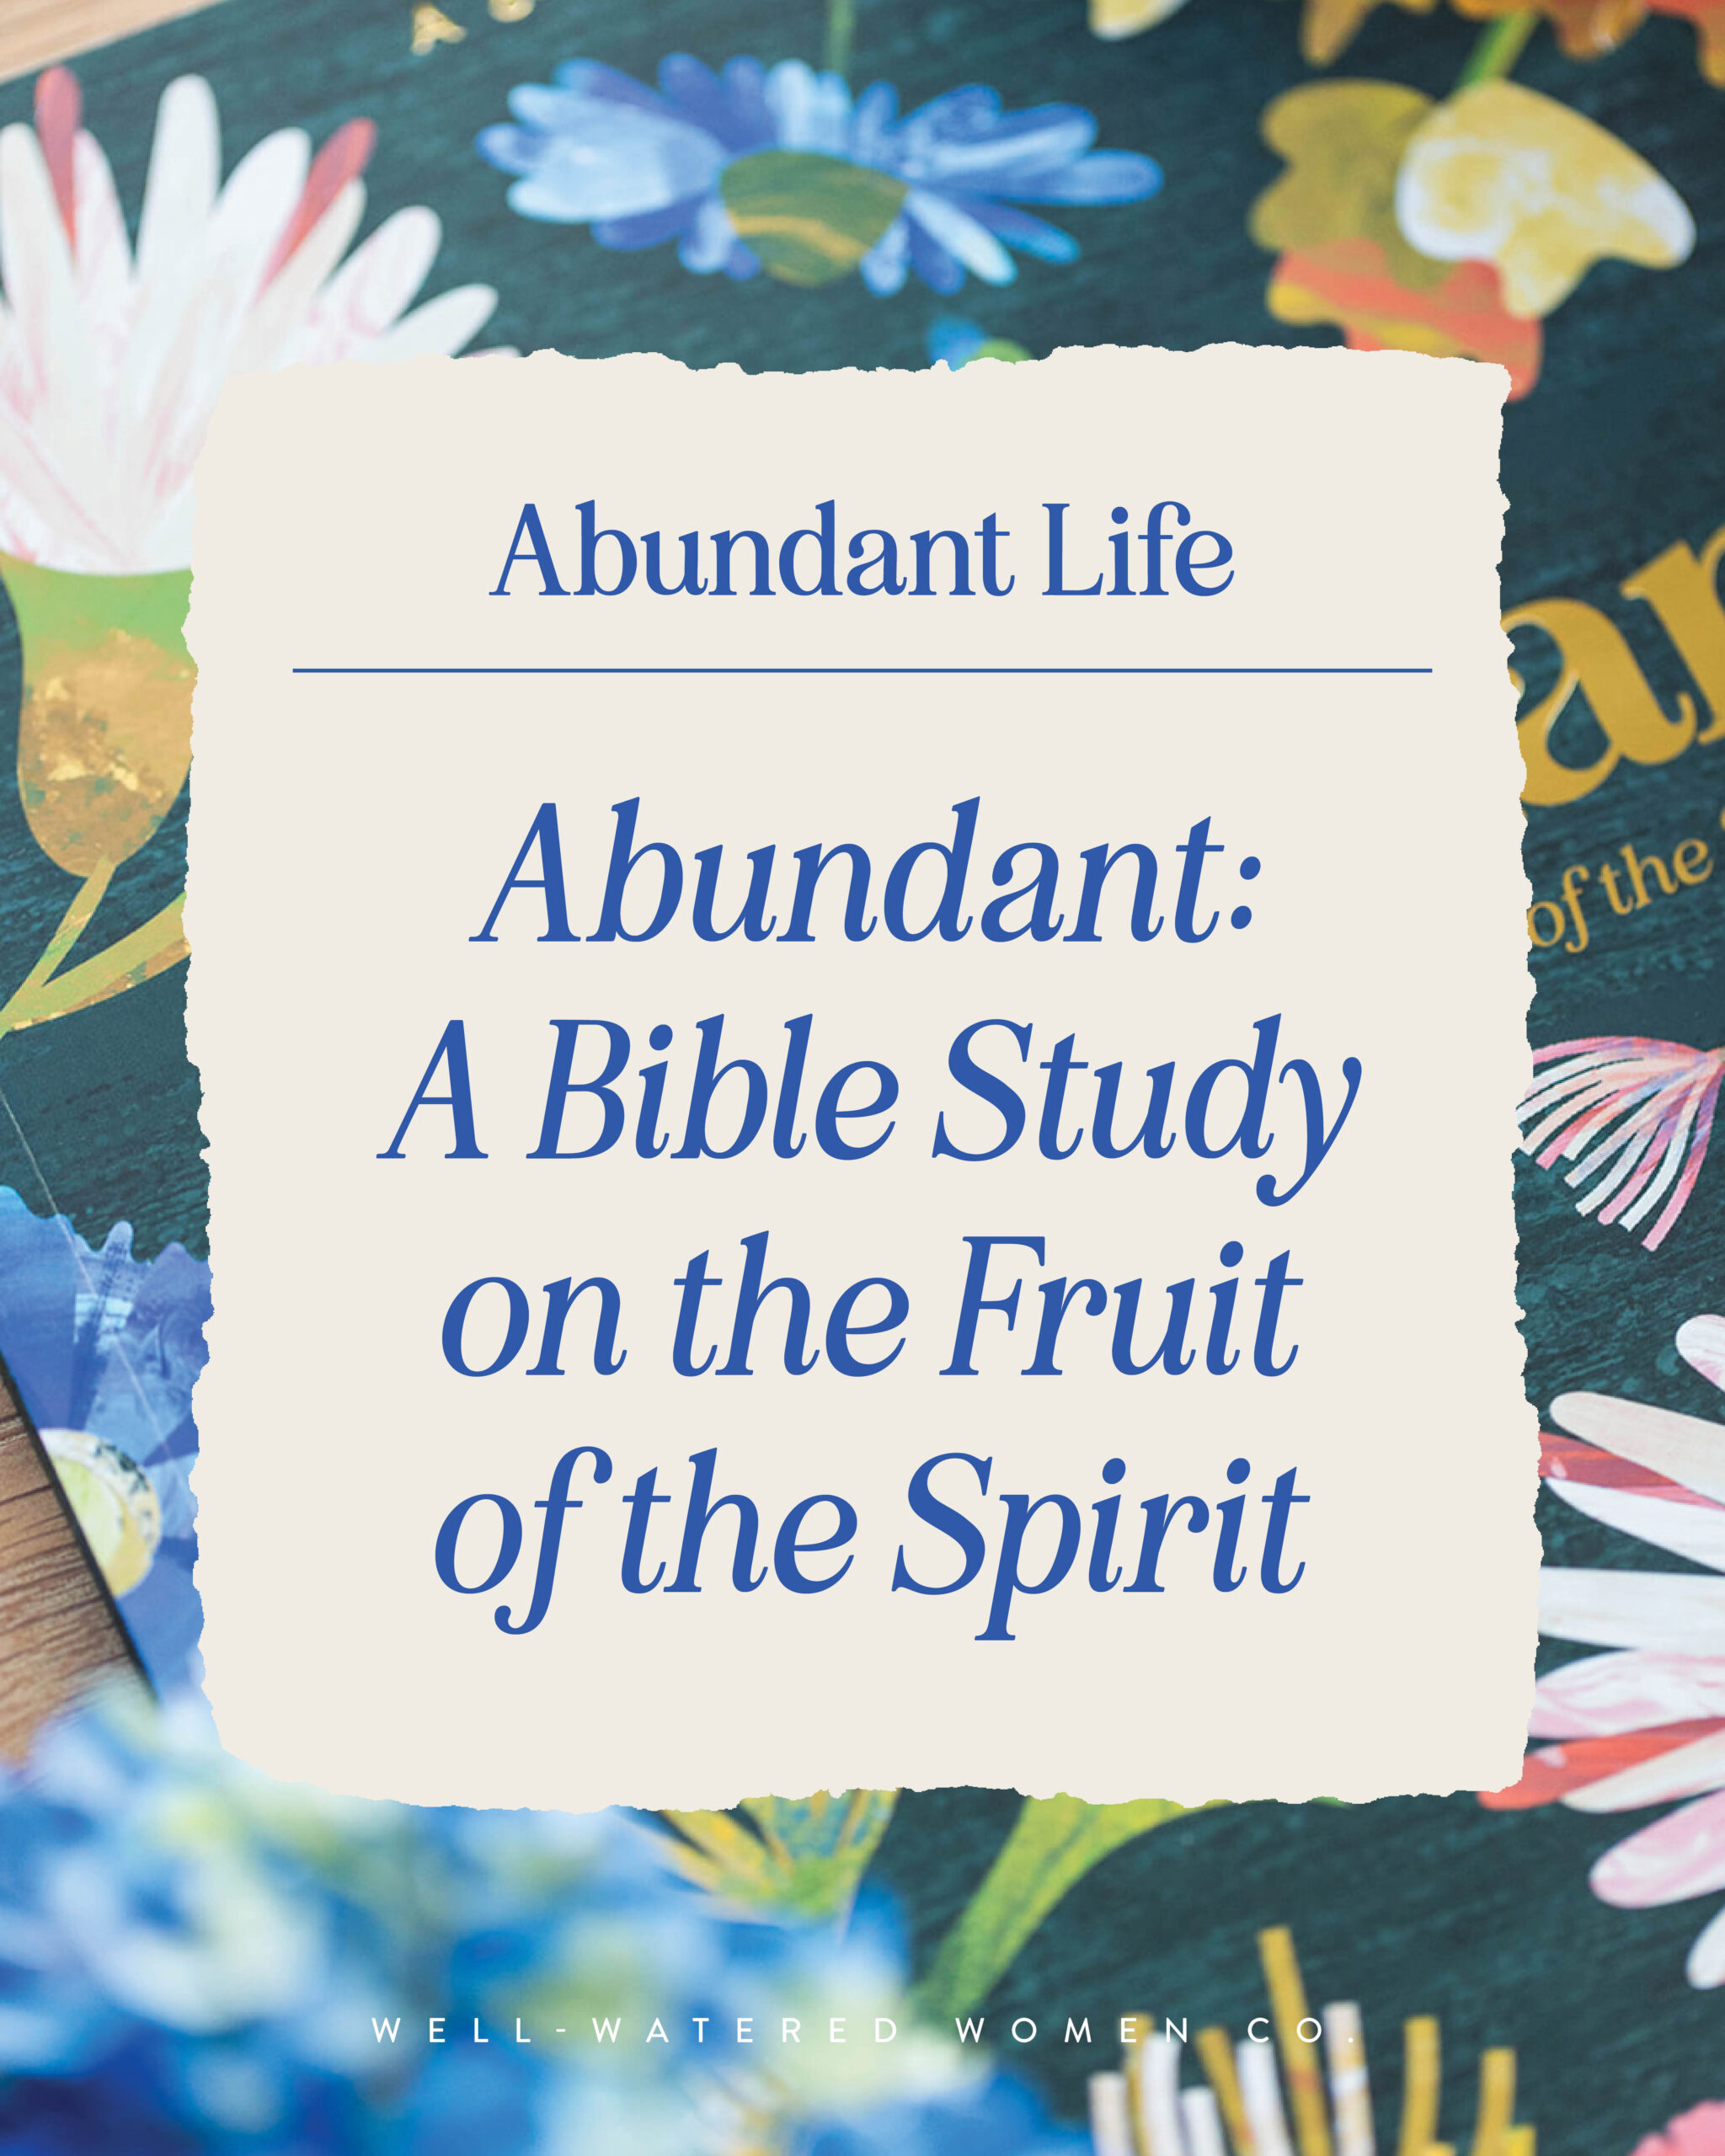 Abundant A Bible Study on the Fruit of the Spirit - an article from Well-Watered Women